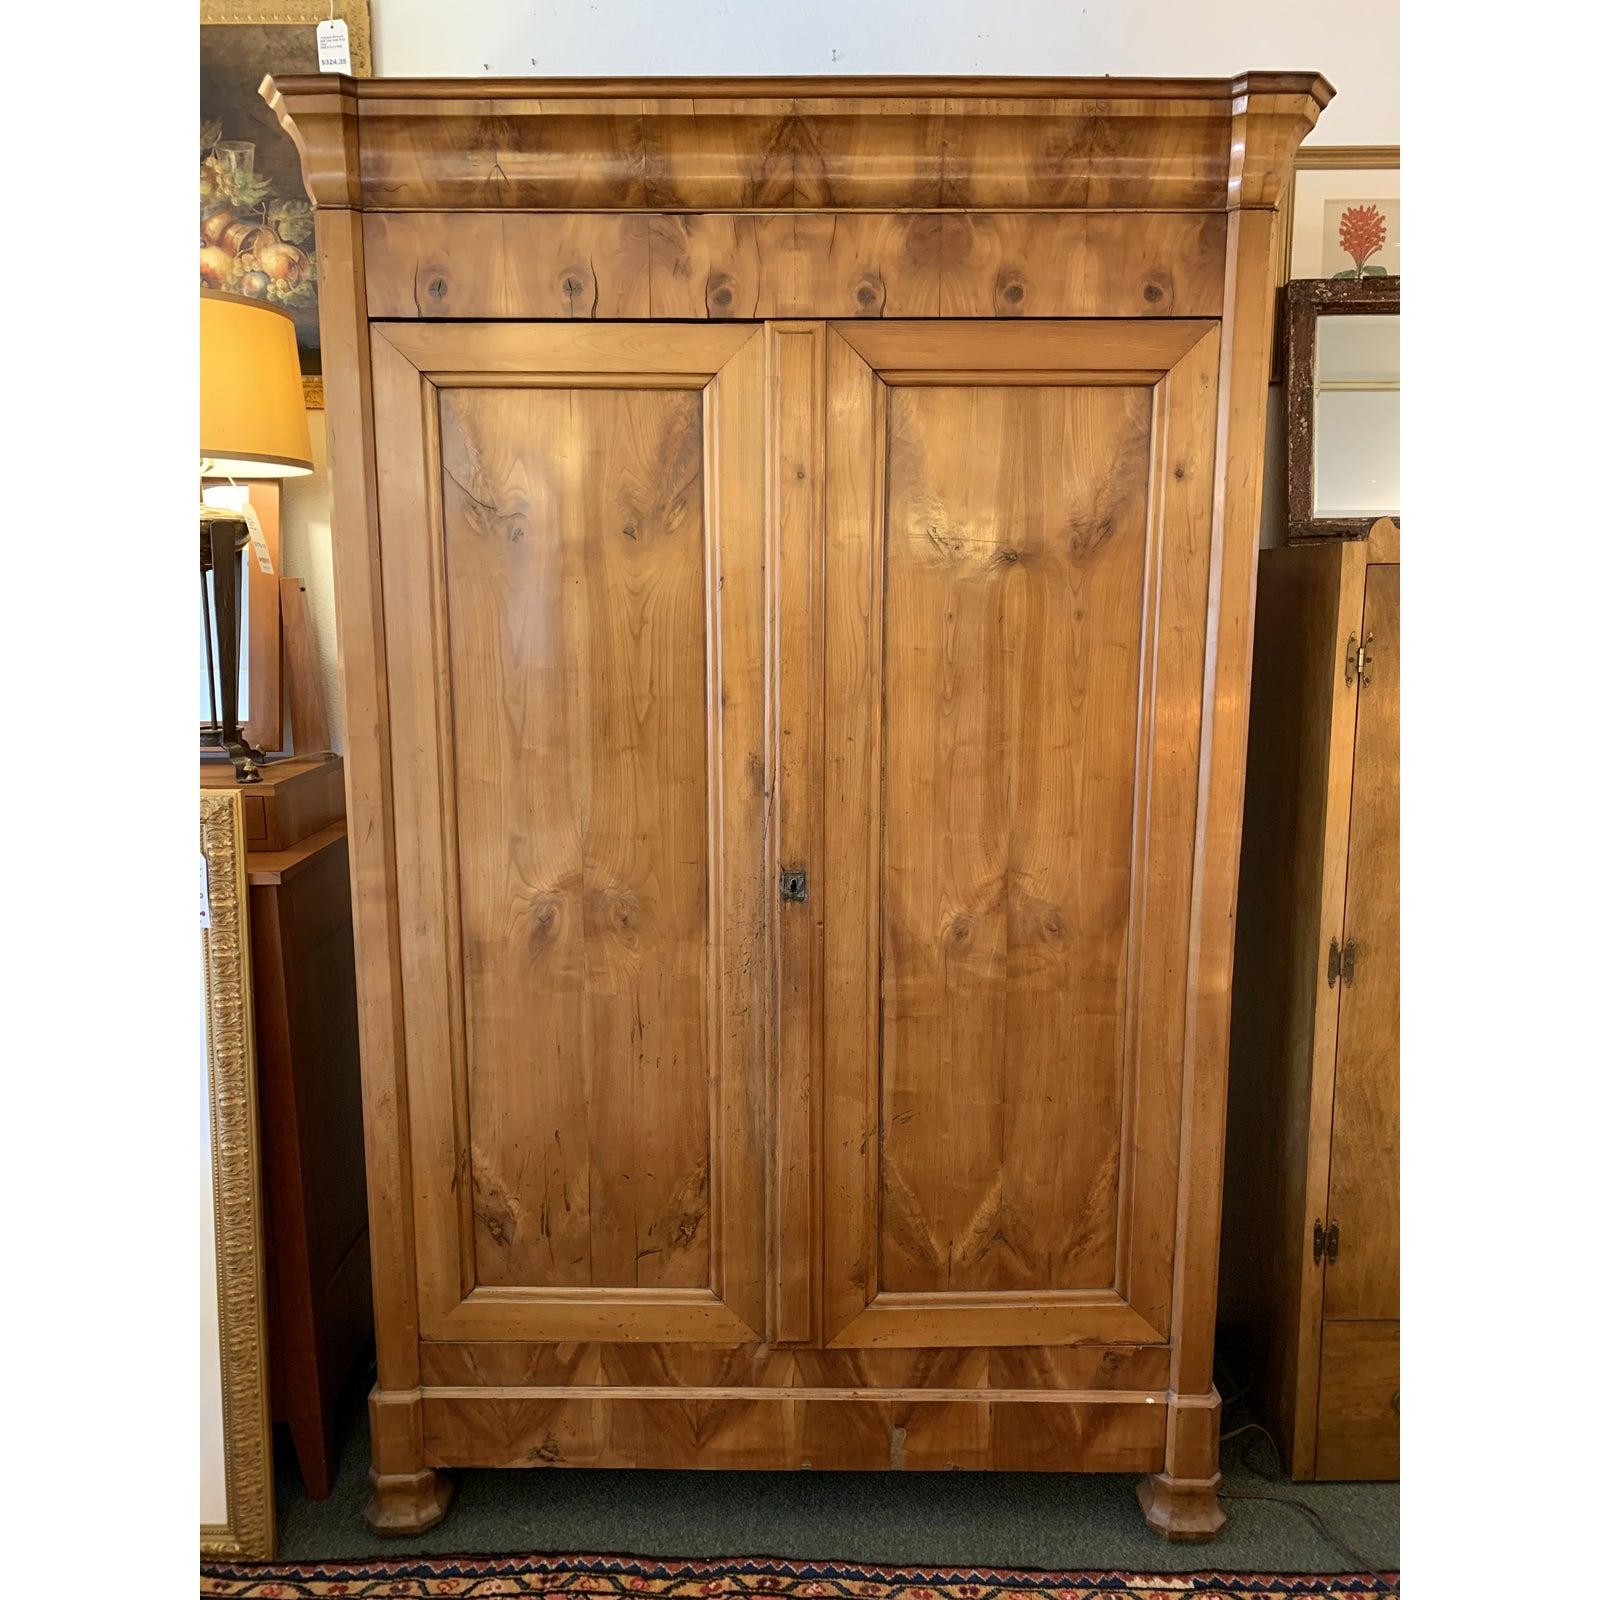 A beautiful antique armoire. Beautiful burls draw the eye to the beautiful woodgrain and elegant silhouette. Two large doors swing open to reveal expansive storage and adjustable shelves and clothes rod. No key available.